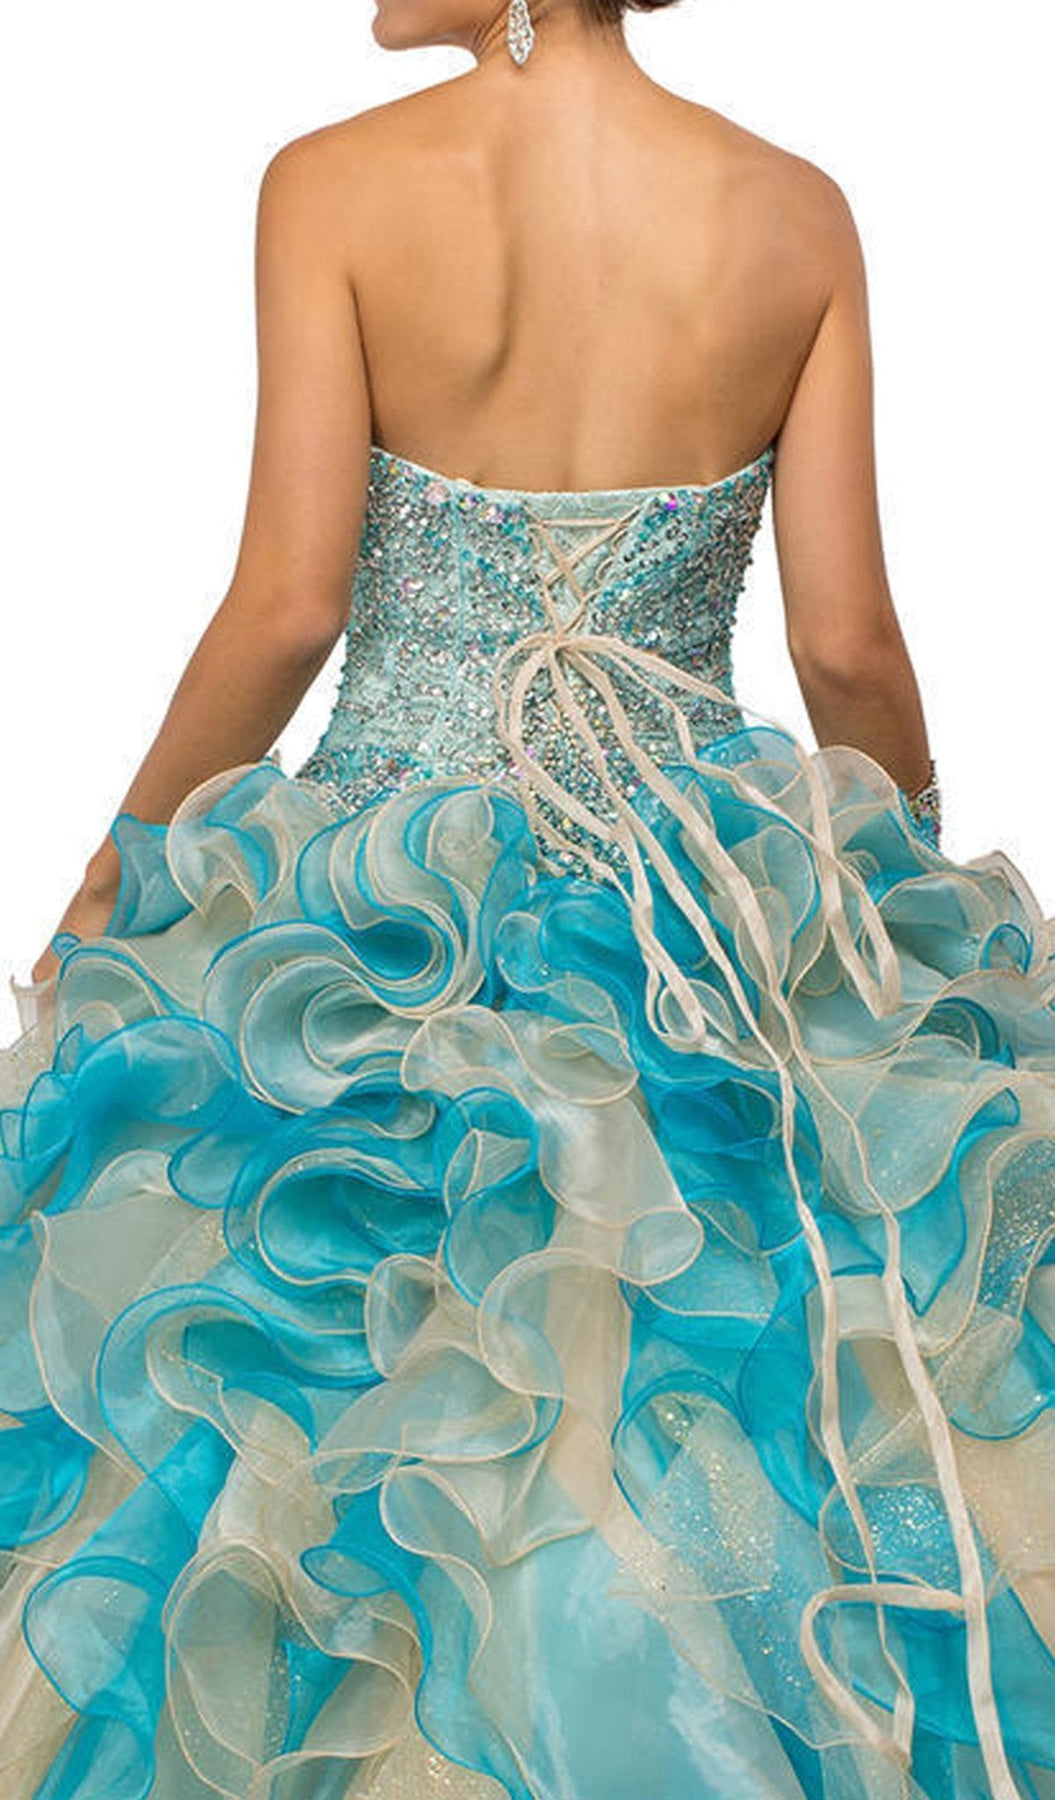 Dancing Queen - 8947 Shimmering Strapless Ruffled Quinceanera Ballgown Special Occasion Dress